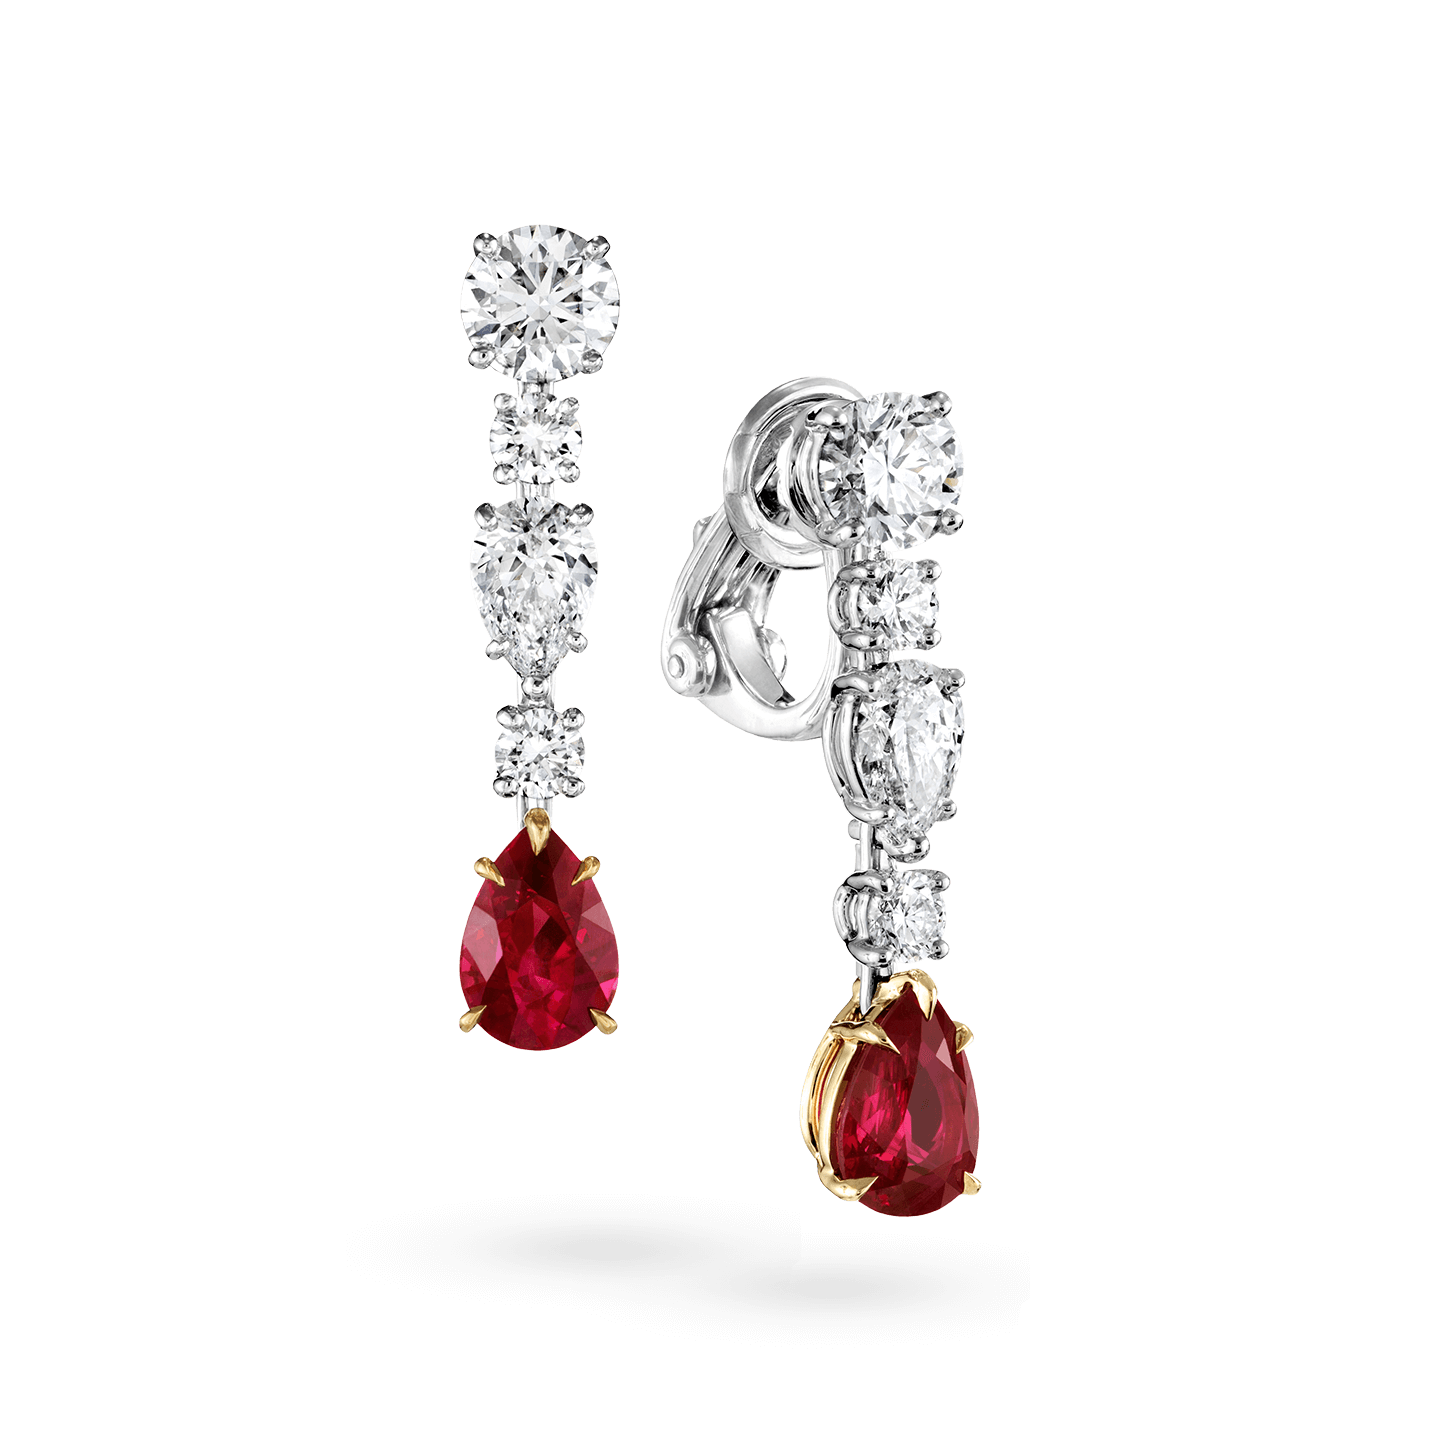 Diamond and Ruby Drop Earrings, Product Image 2